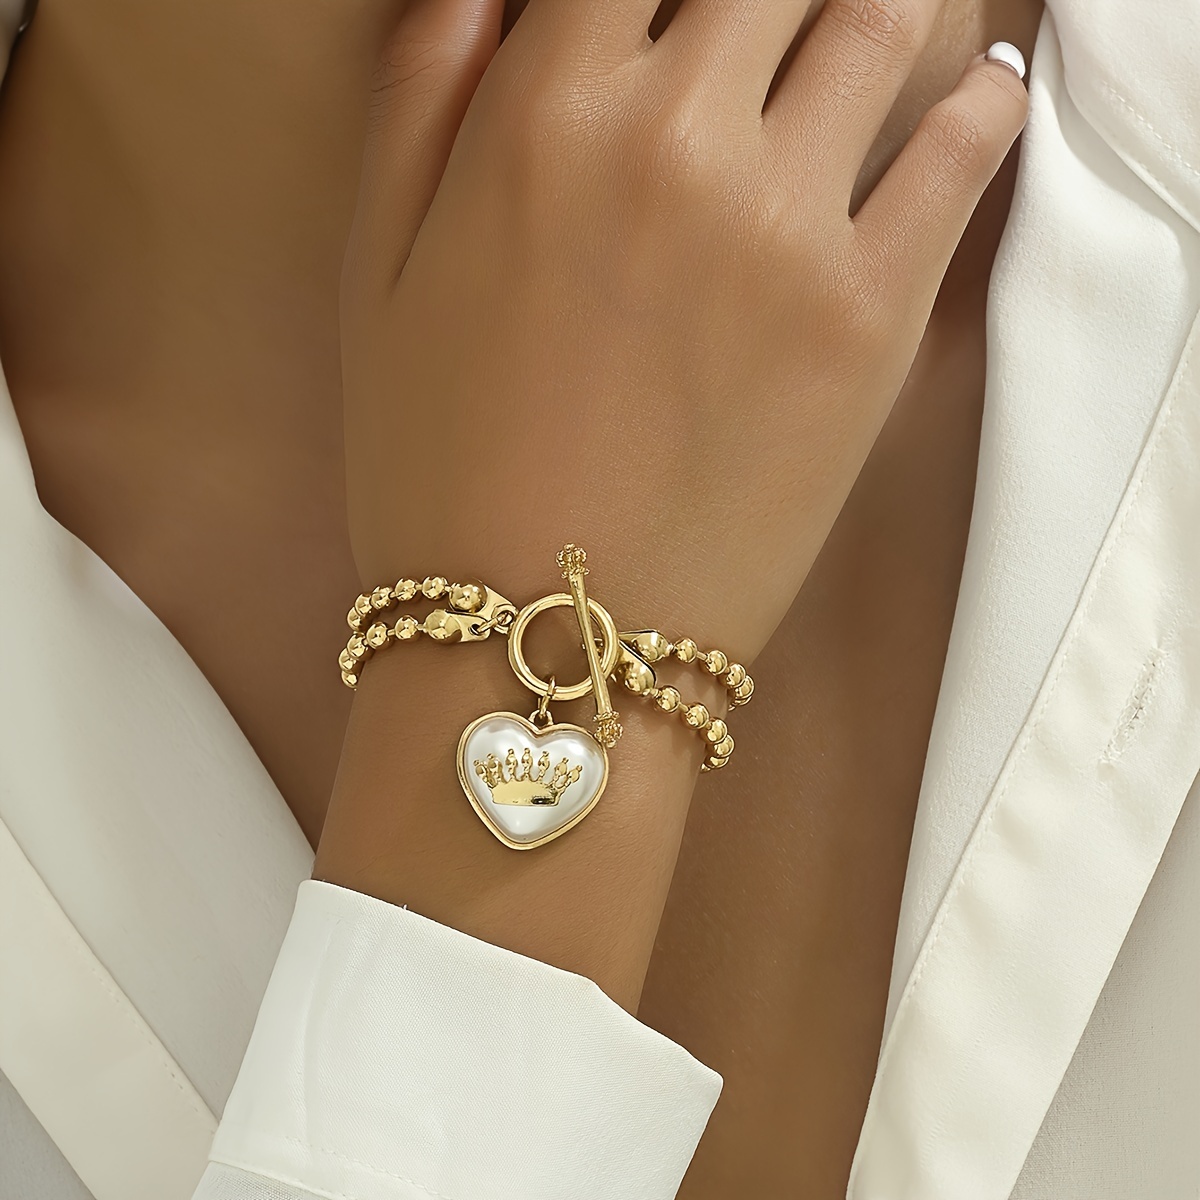 

Elegant Double Layered Bracelet With Plated, Unique Lock Clasp, Heart-shaped Faux Pearl Crown Charm, Fashionable Jewelry